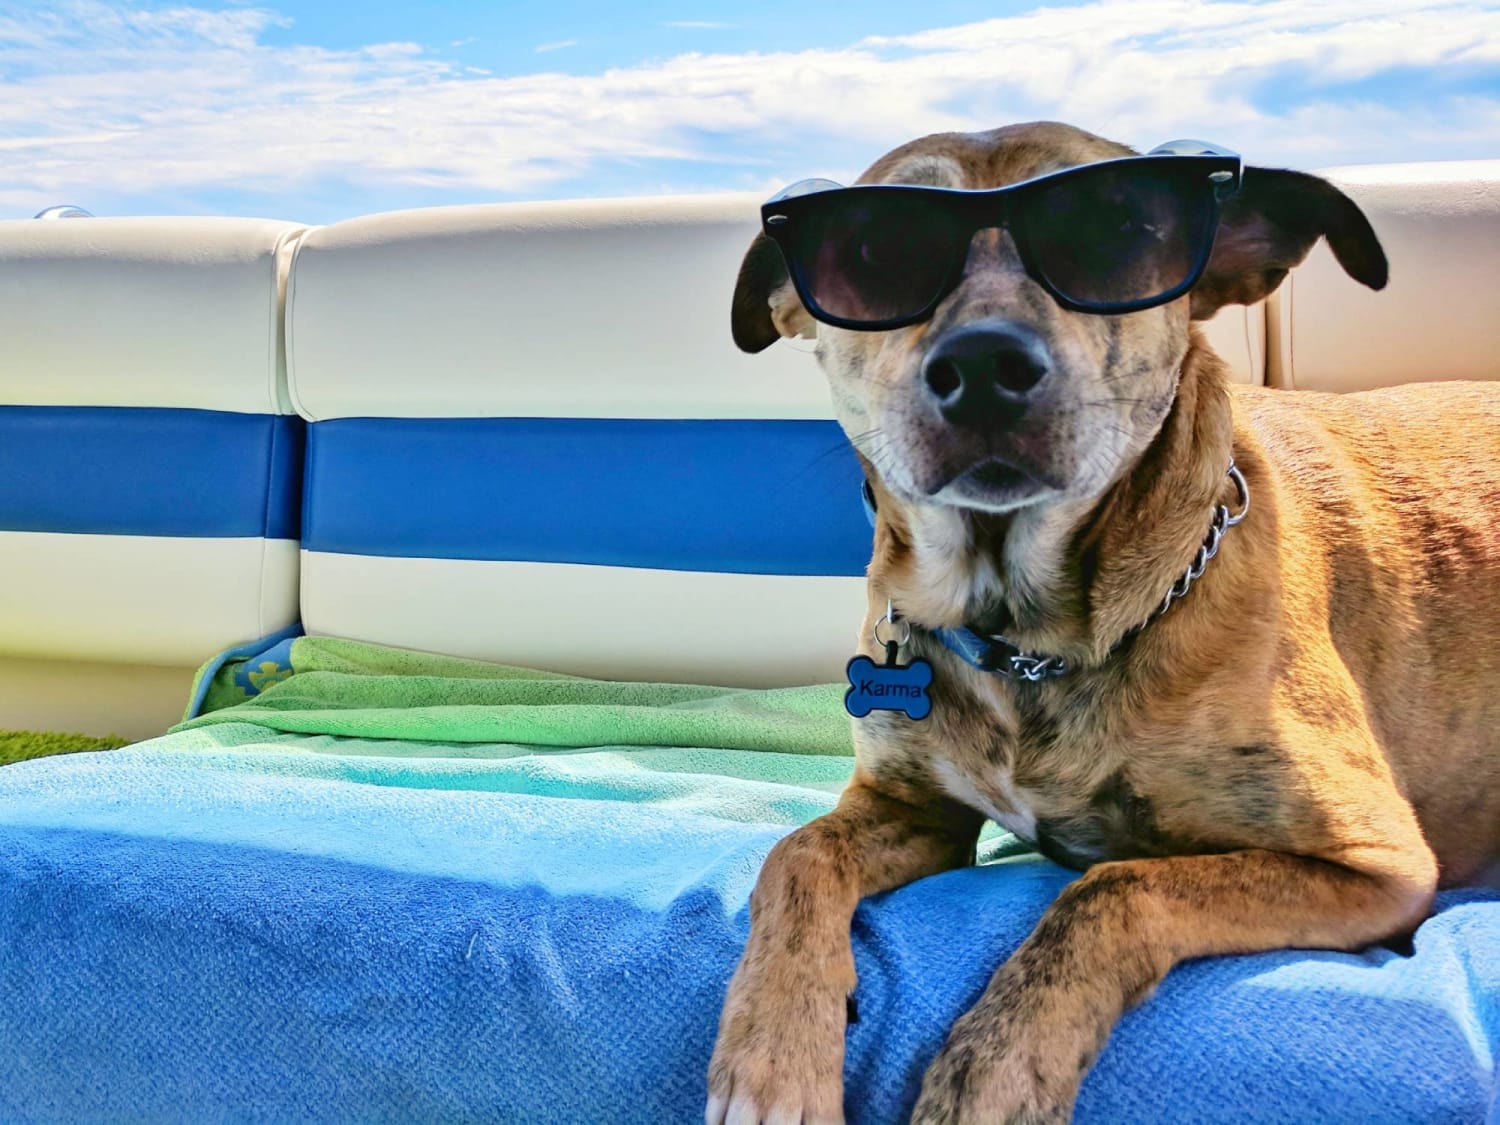 Keep your dog safe and cool during summer